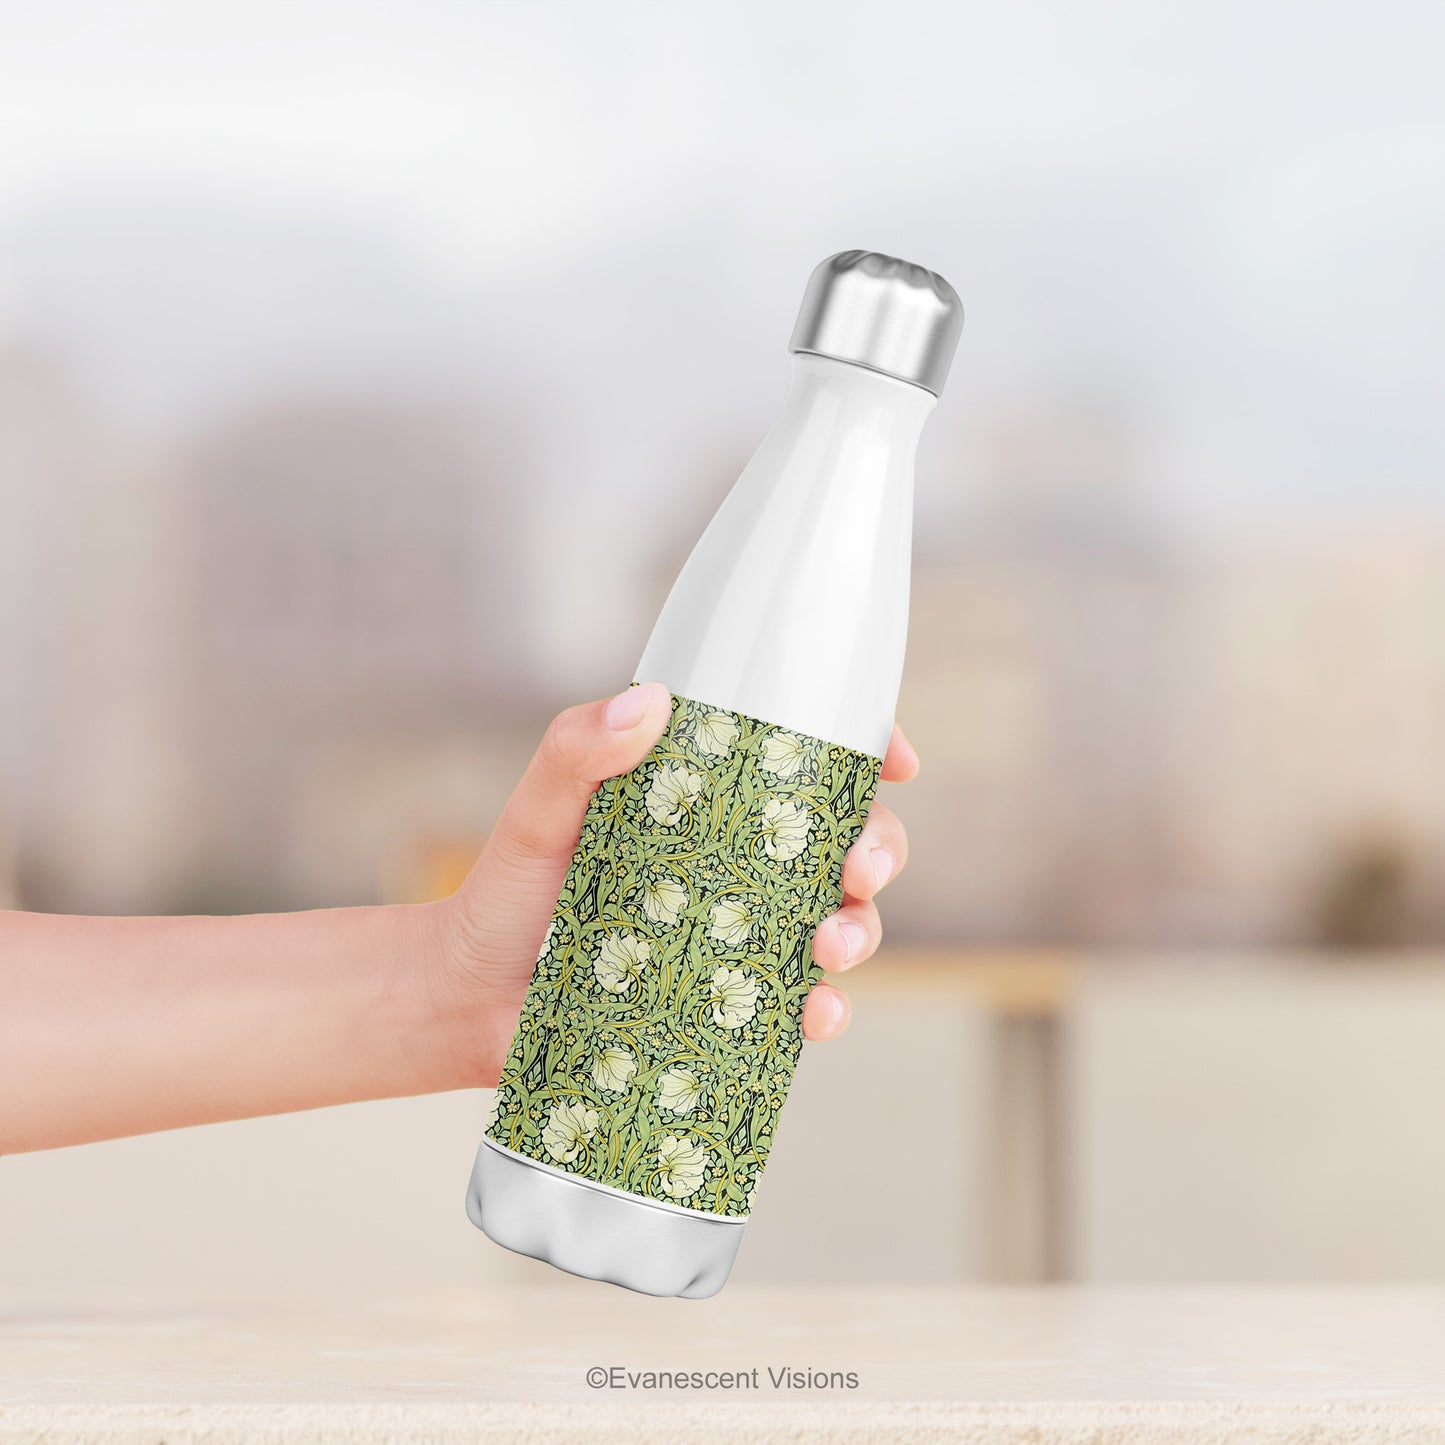 A hand holding a Stainless Steel Water Bottle with the William Morris Pimpernel Design